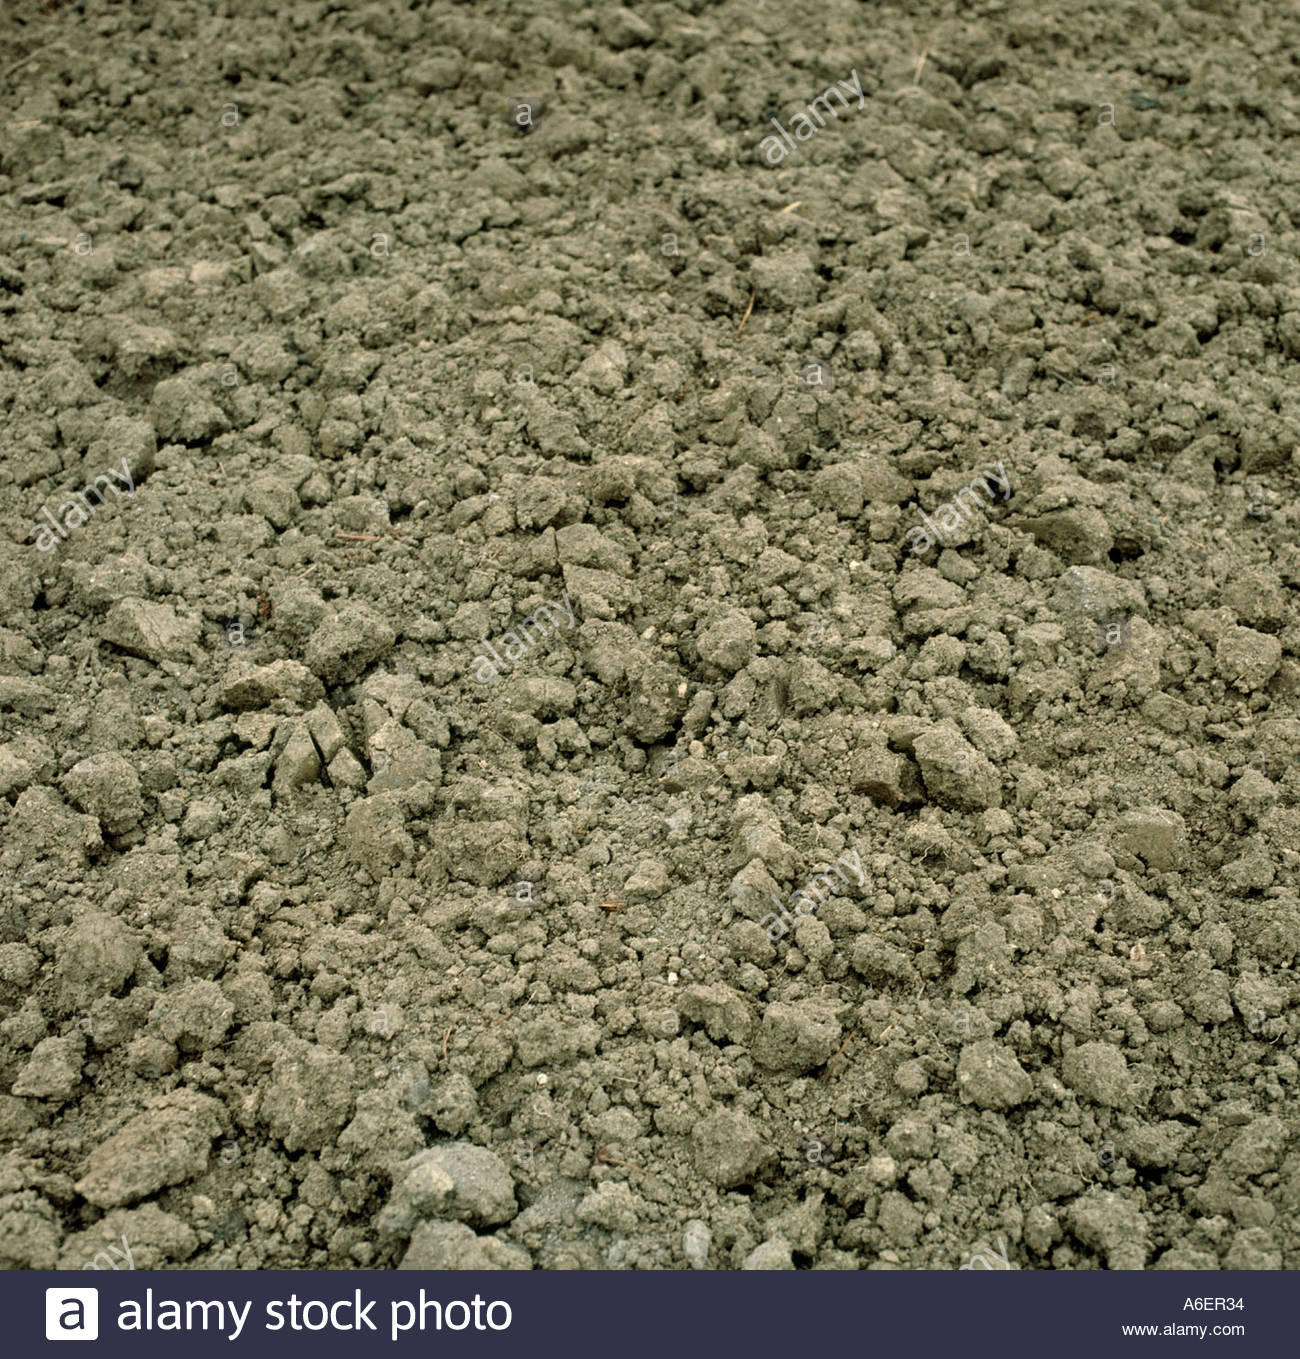 A clay loam seedbed soil surface Stock Photo